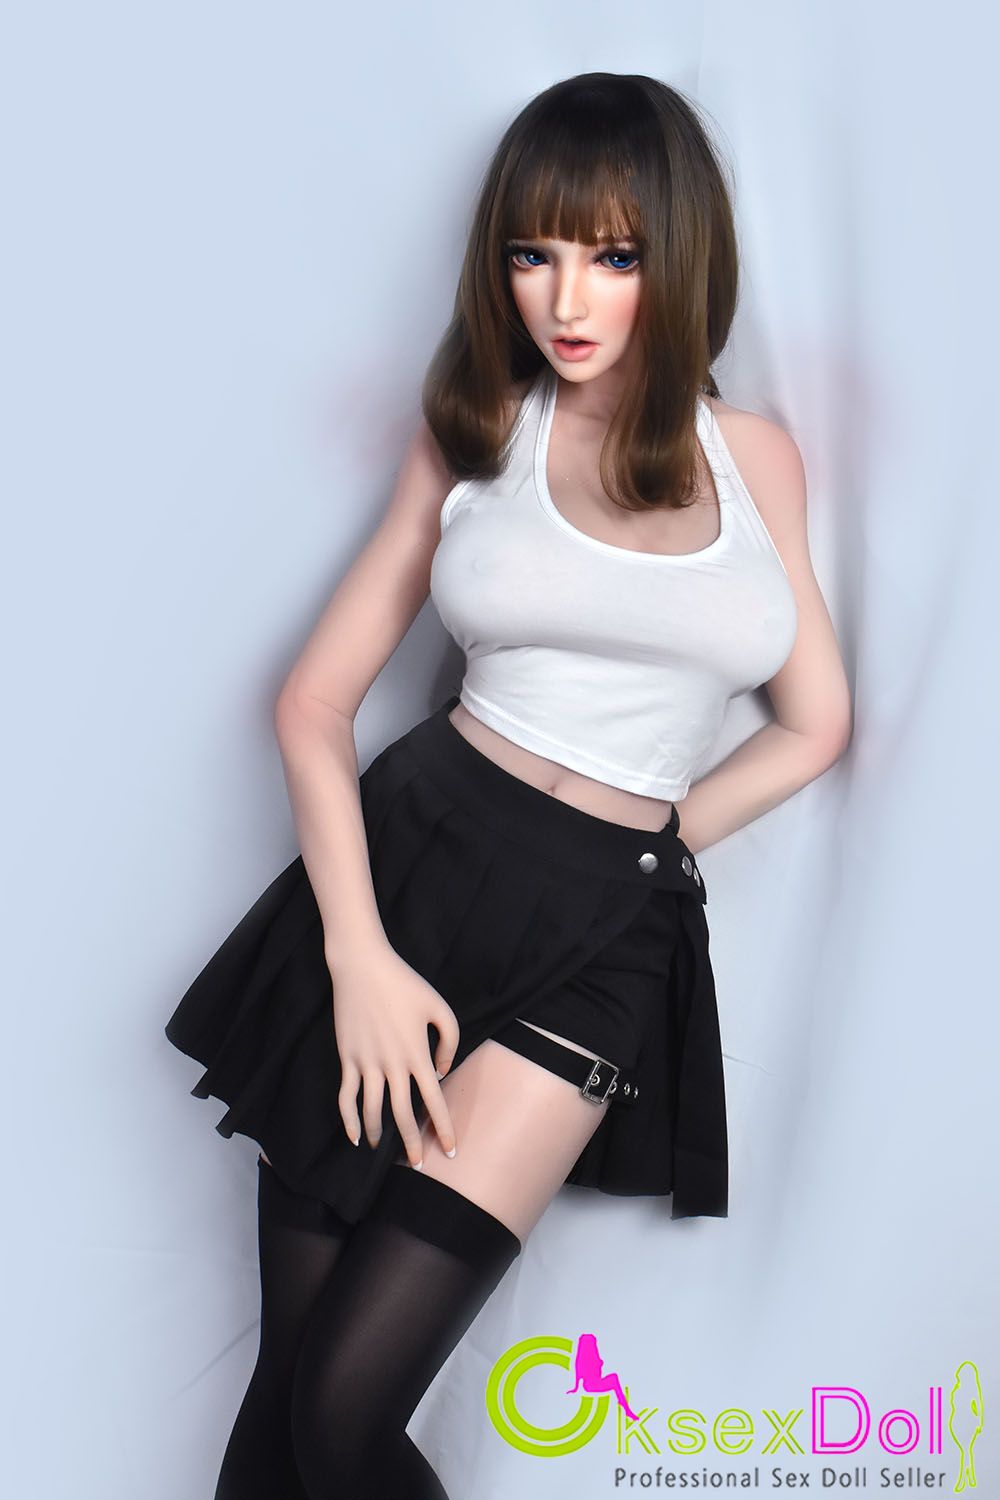 150cm Huge Tits Real Sex Doll images